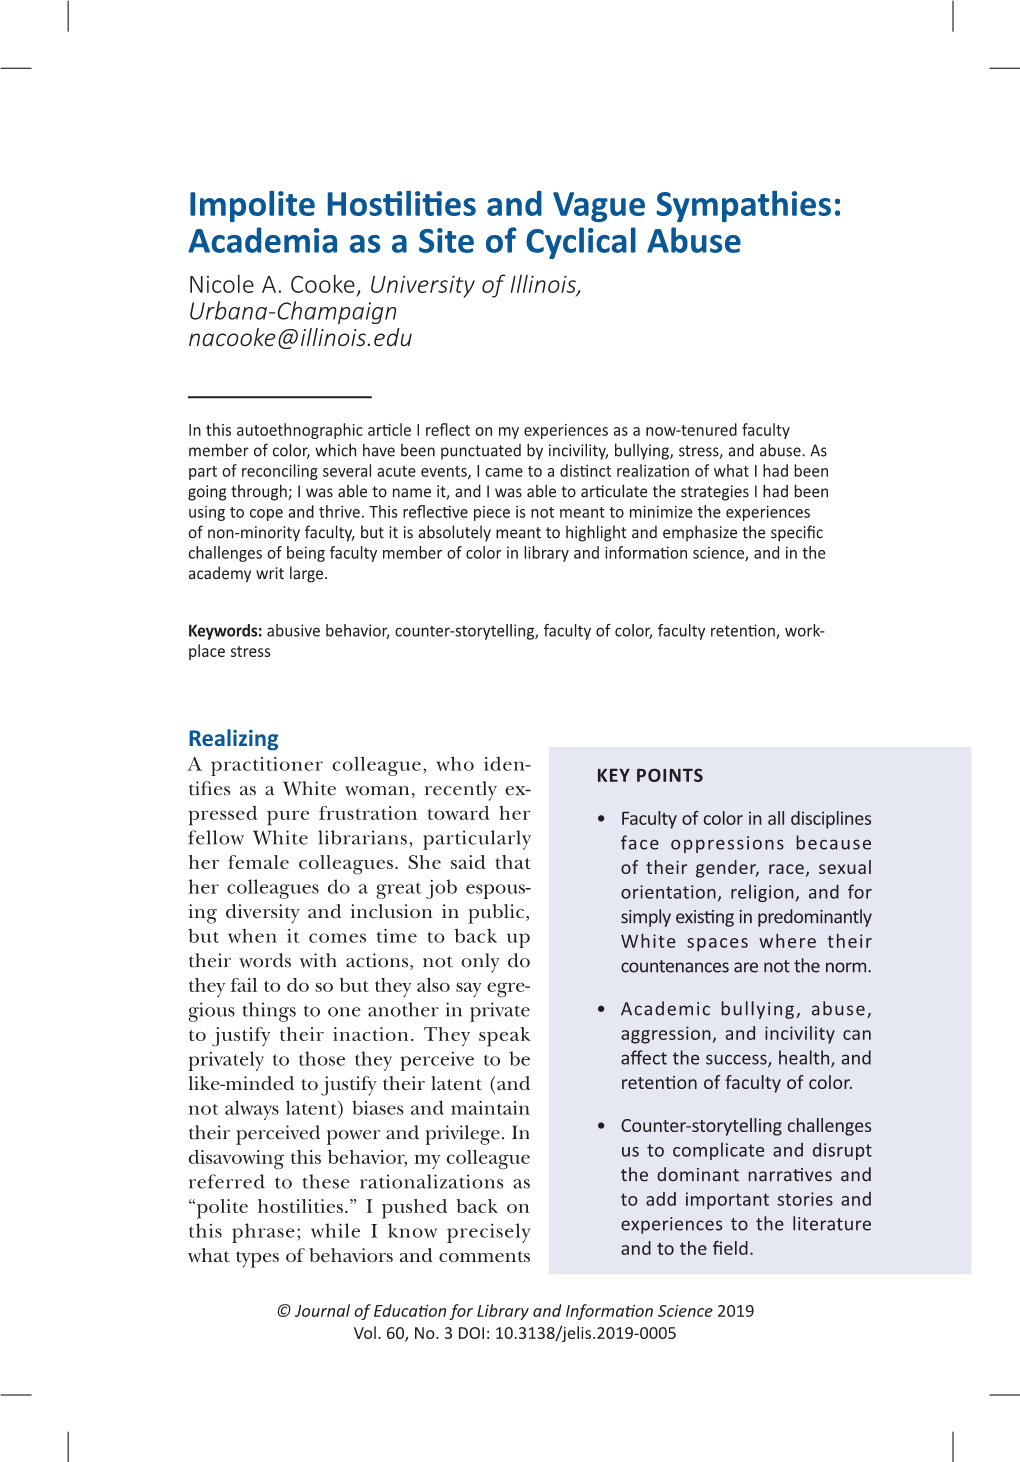 Impolite Hostilities and Vague Sympathies: Academia As a Site of Cyclical Abuse Nicole A